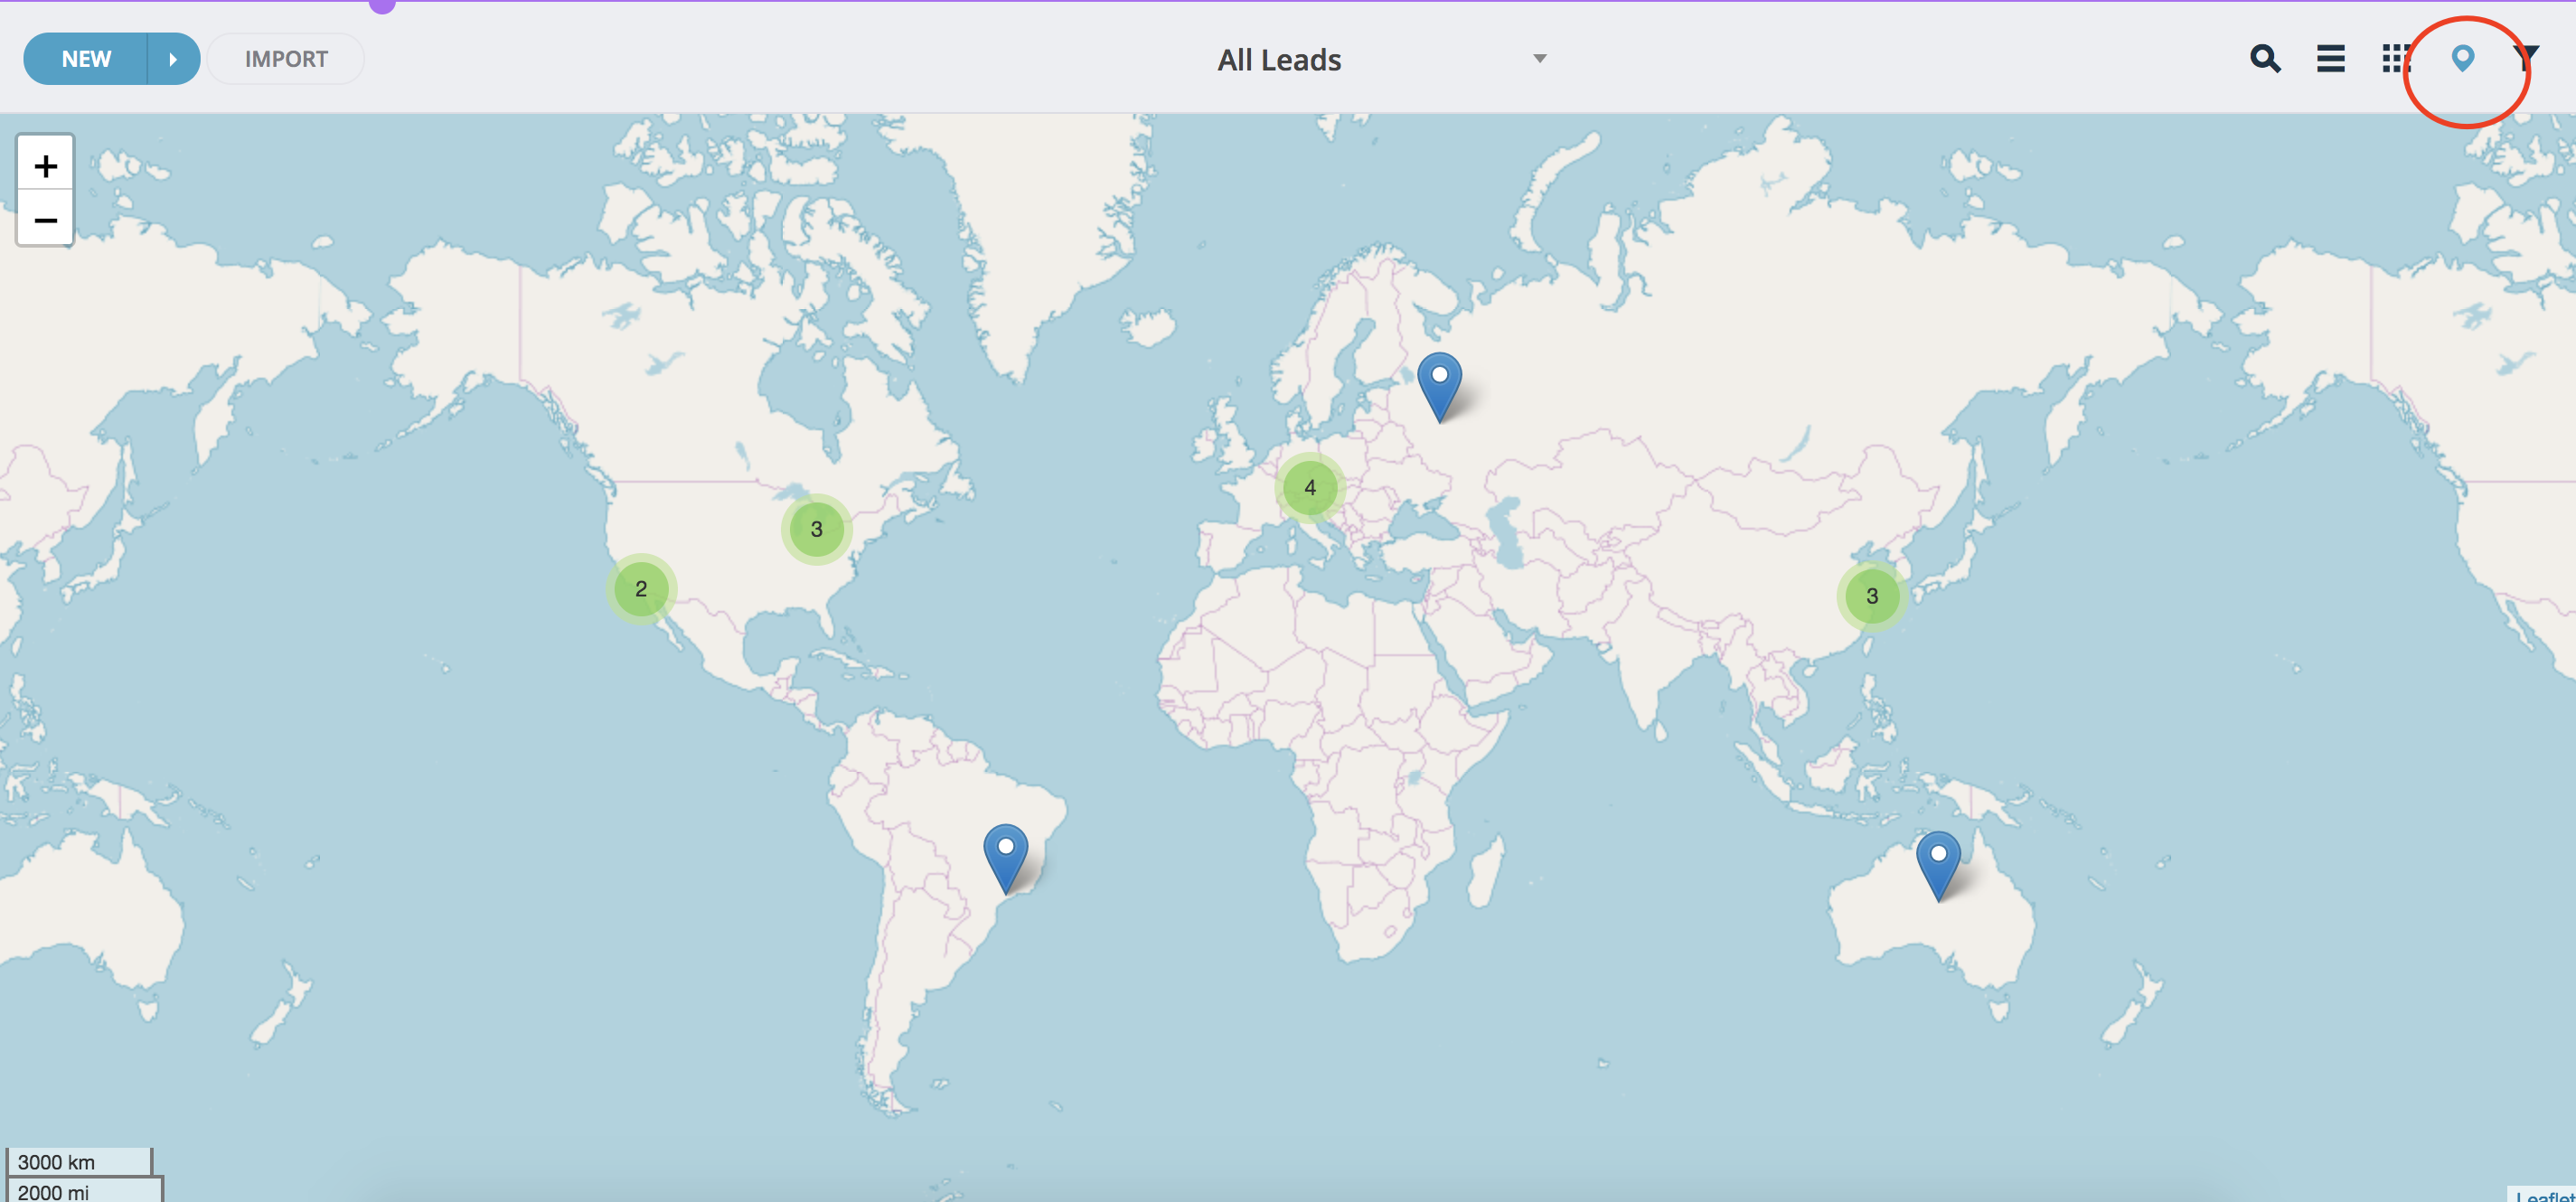 maps-geolocation-leads-teamgate-crm.png